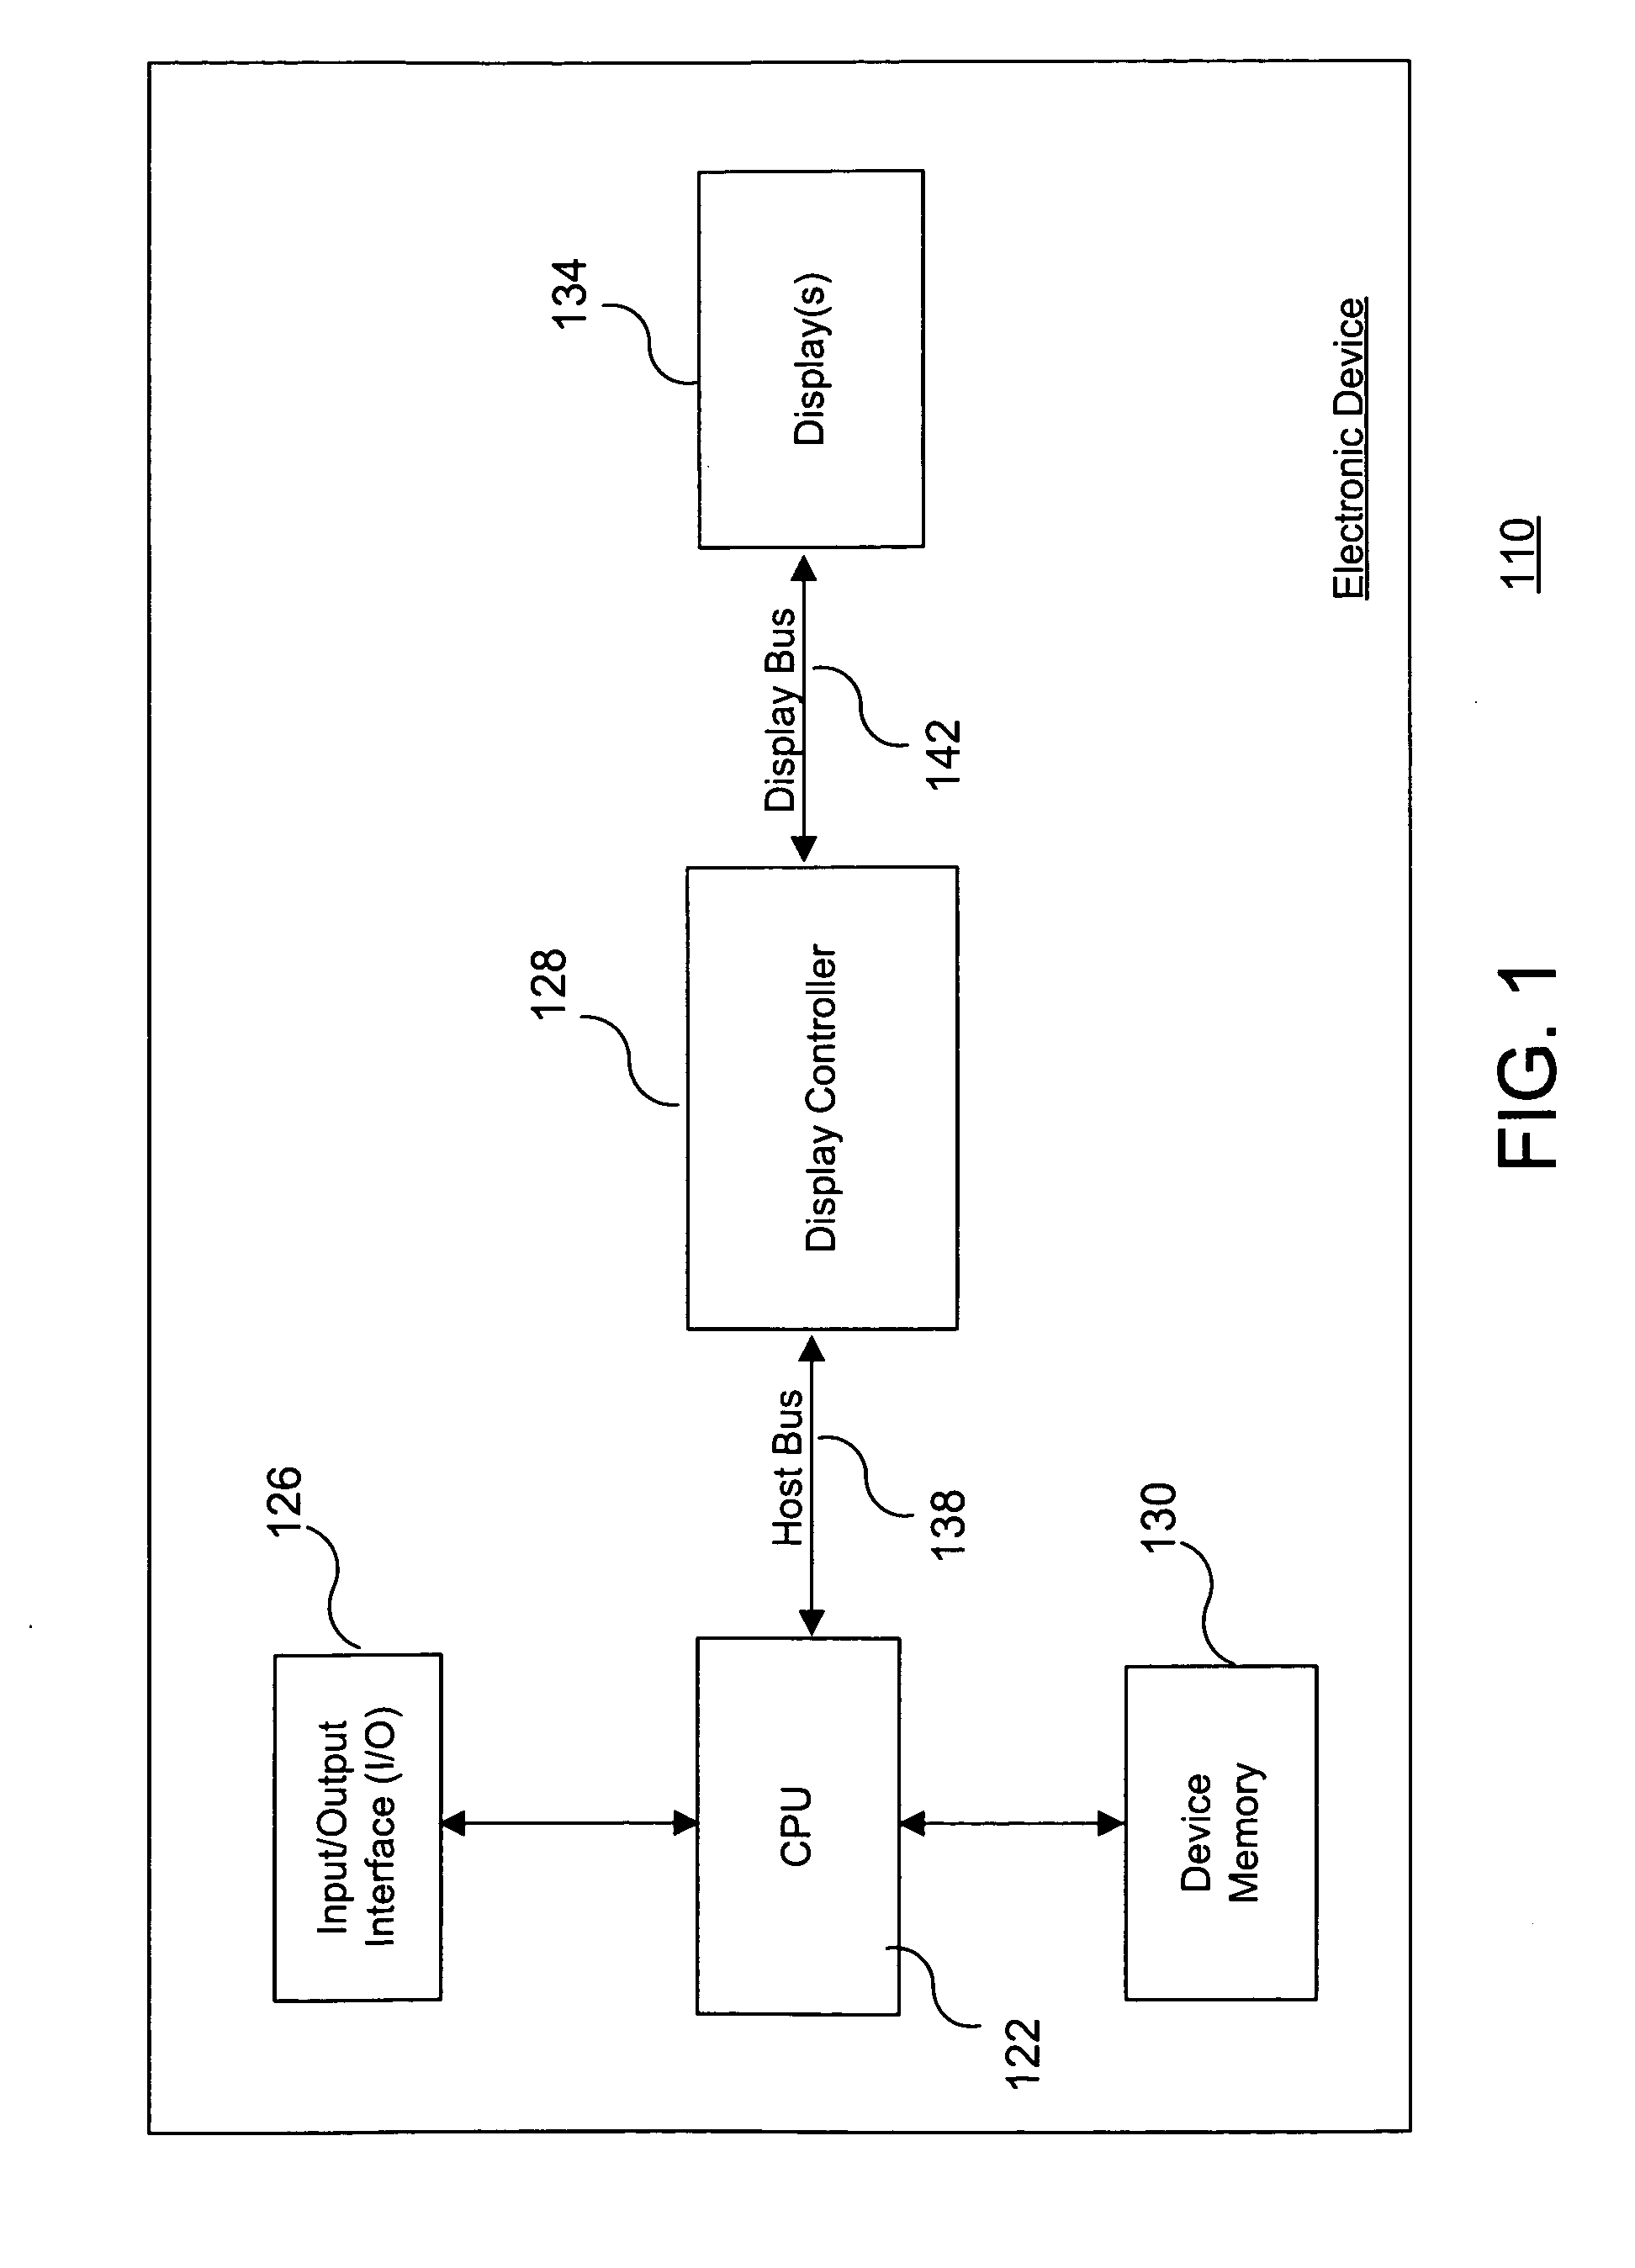 System and method for conserving memory bandwidth while supporting multiple sprites